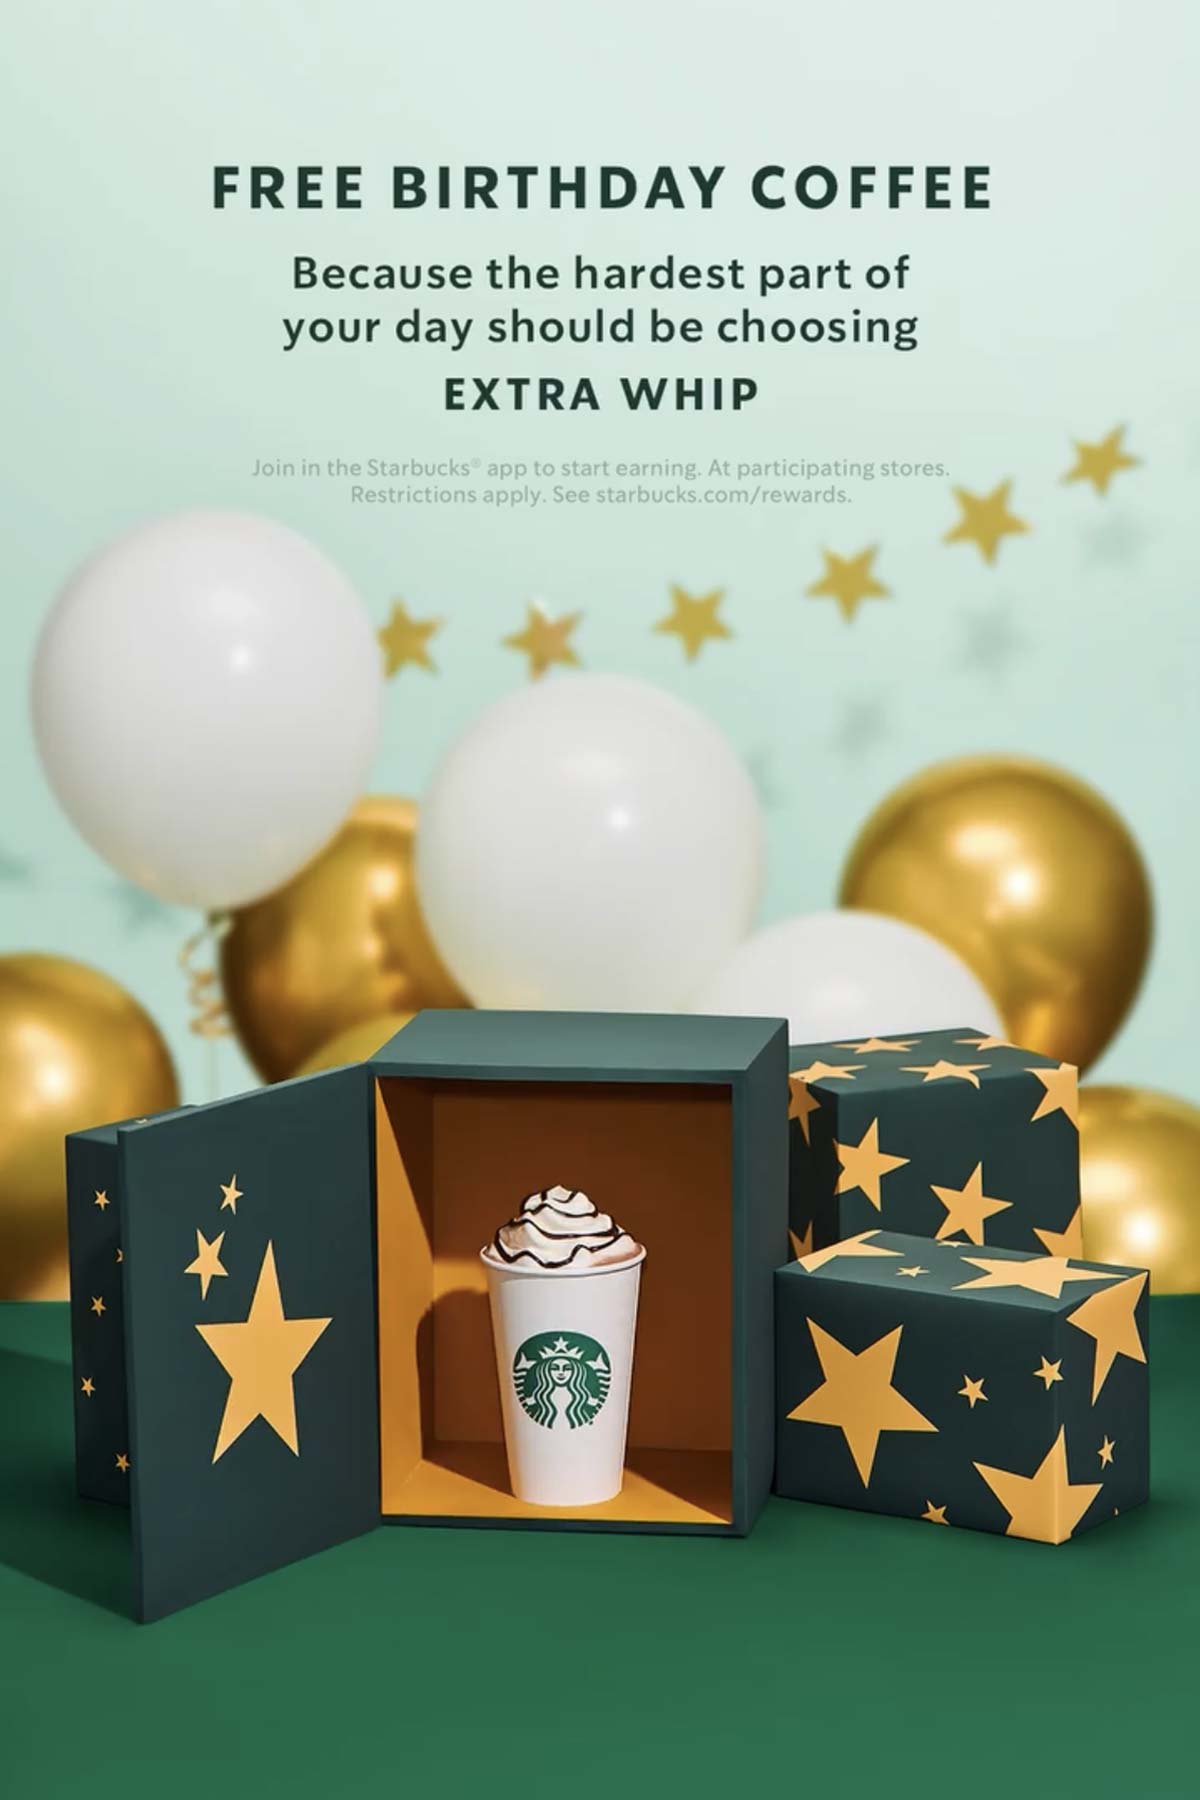 "Free Birthday Coffee" text on a green background with balloons and gift boxes.